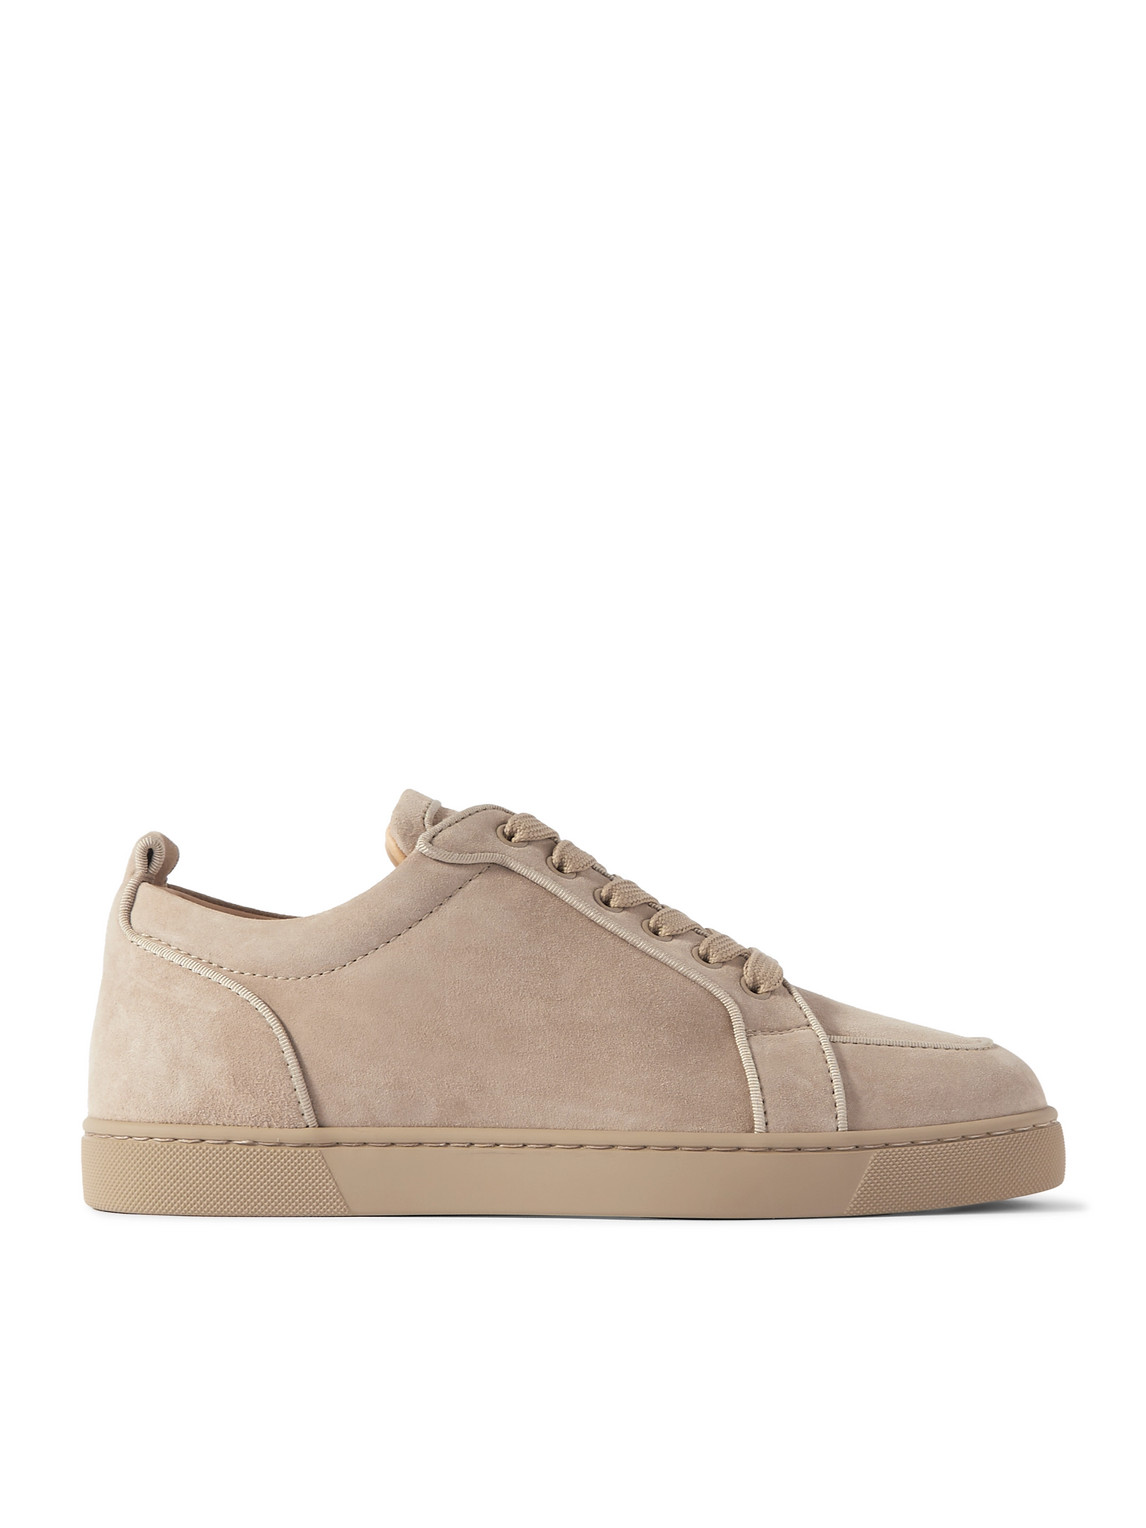 Christian Louboutin Rantulow Suede Sneakers In Neutrals